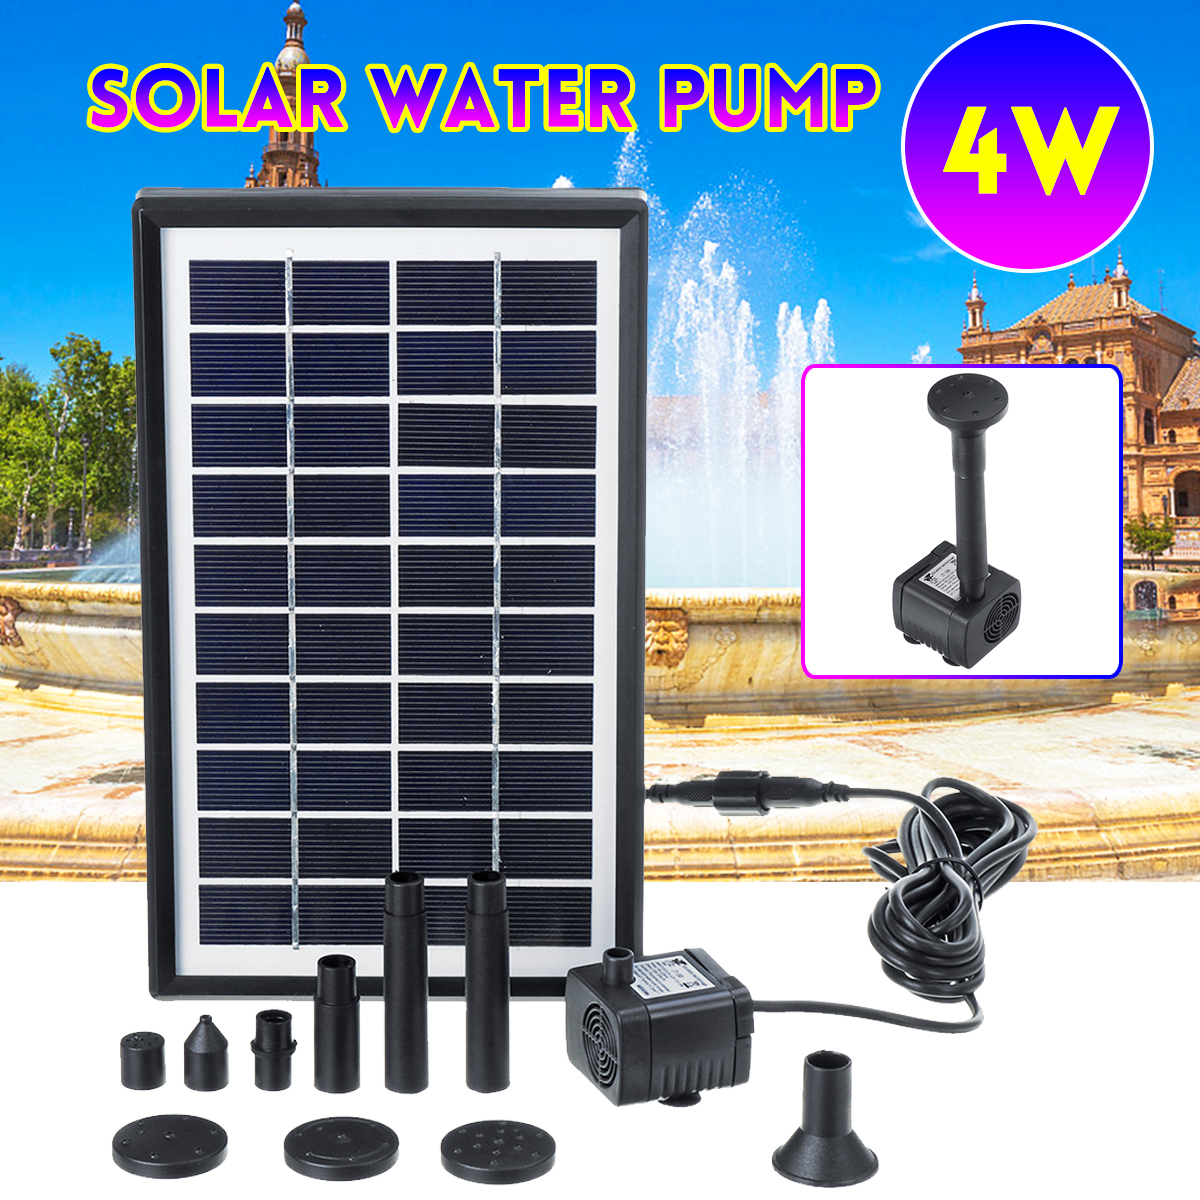 4W-10V-380LH-Solar-Panel-Water-Pump-Landscape-Pond-Pool-Aquarium-Floating-Fountain-with-6-Nozzles-1543610-2